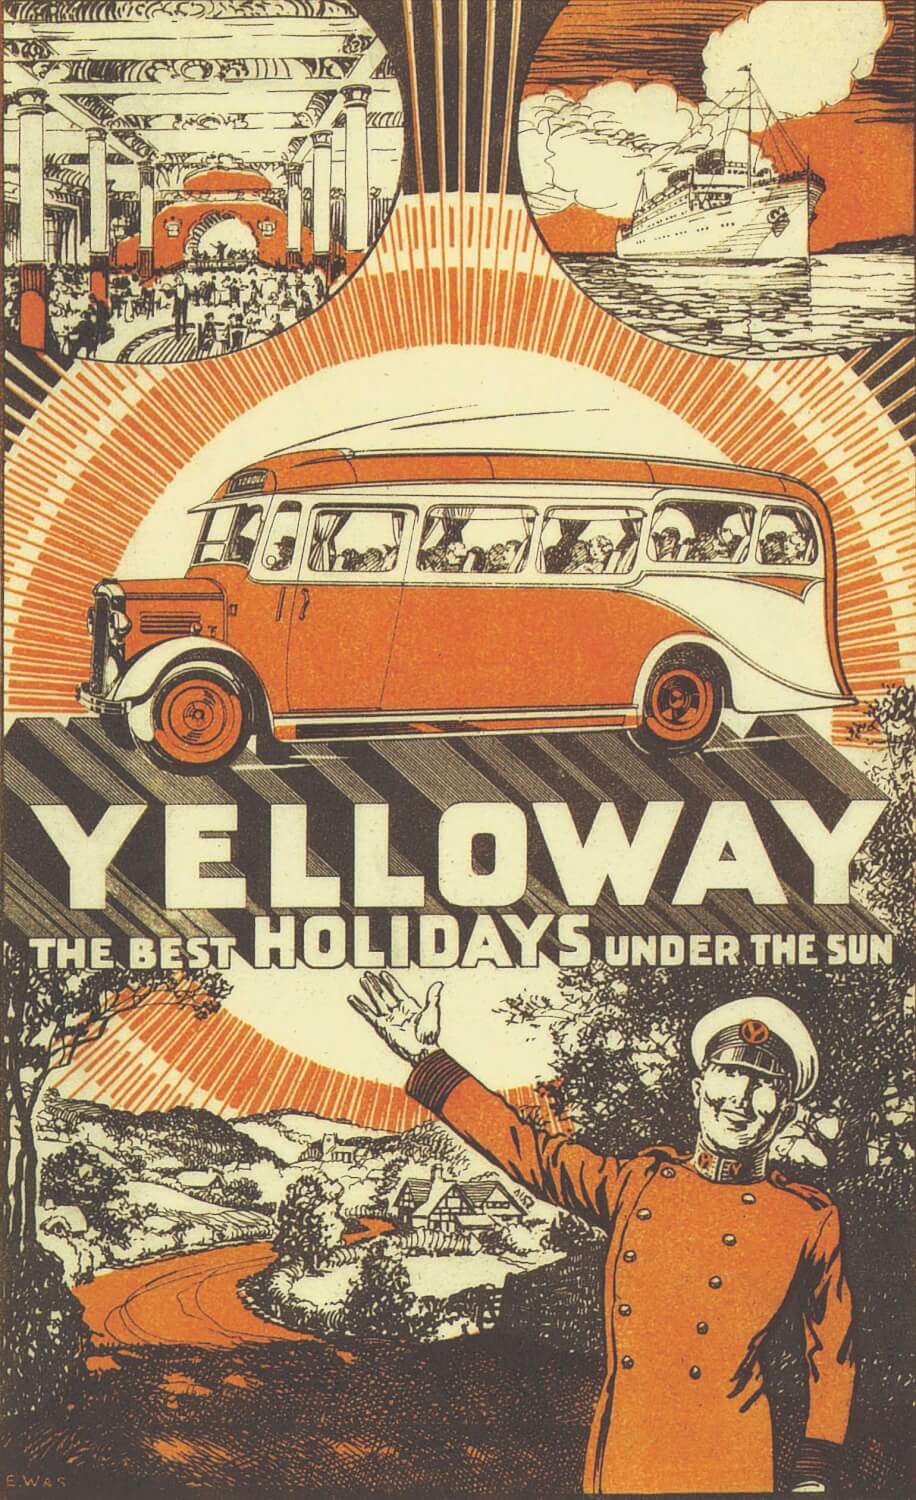 The front cover of Yelloway’s 1936 coach tours brochure. Dave Haddock Collection. – Copy